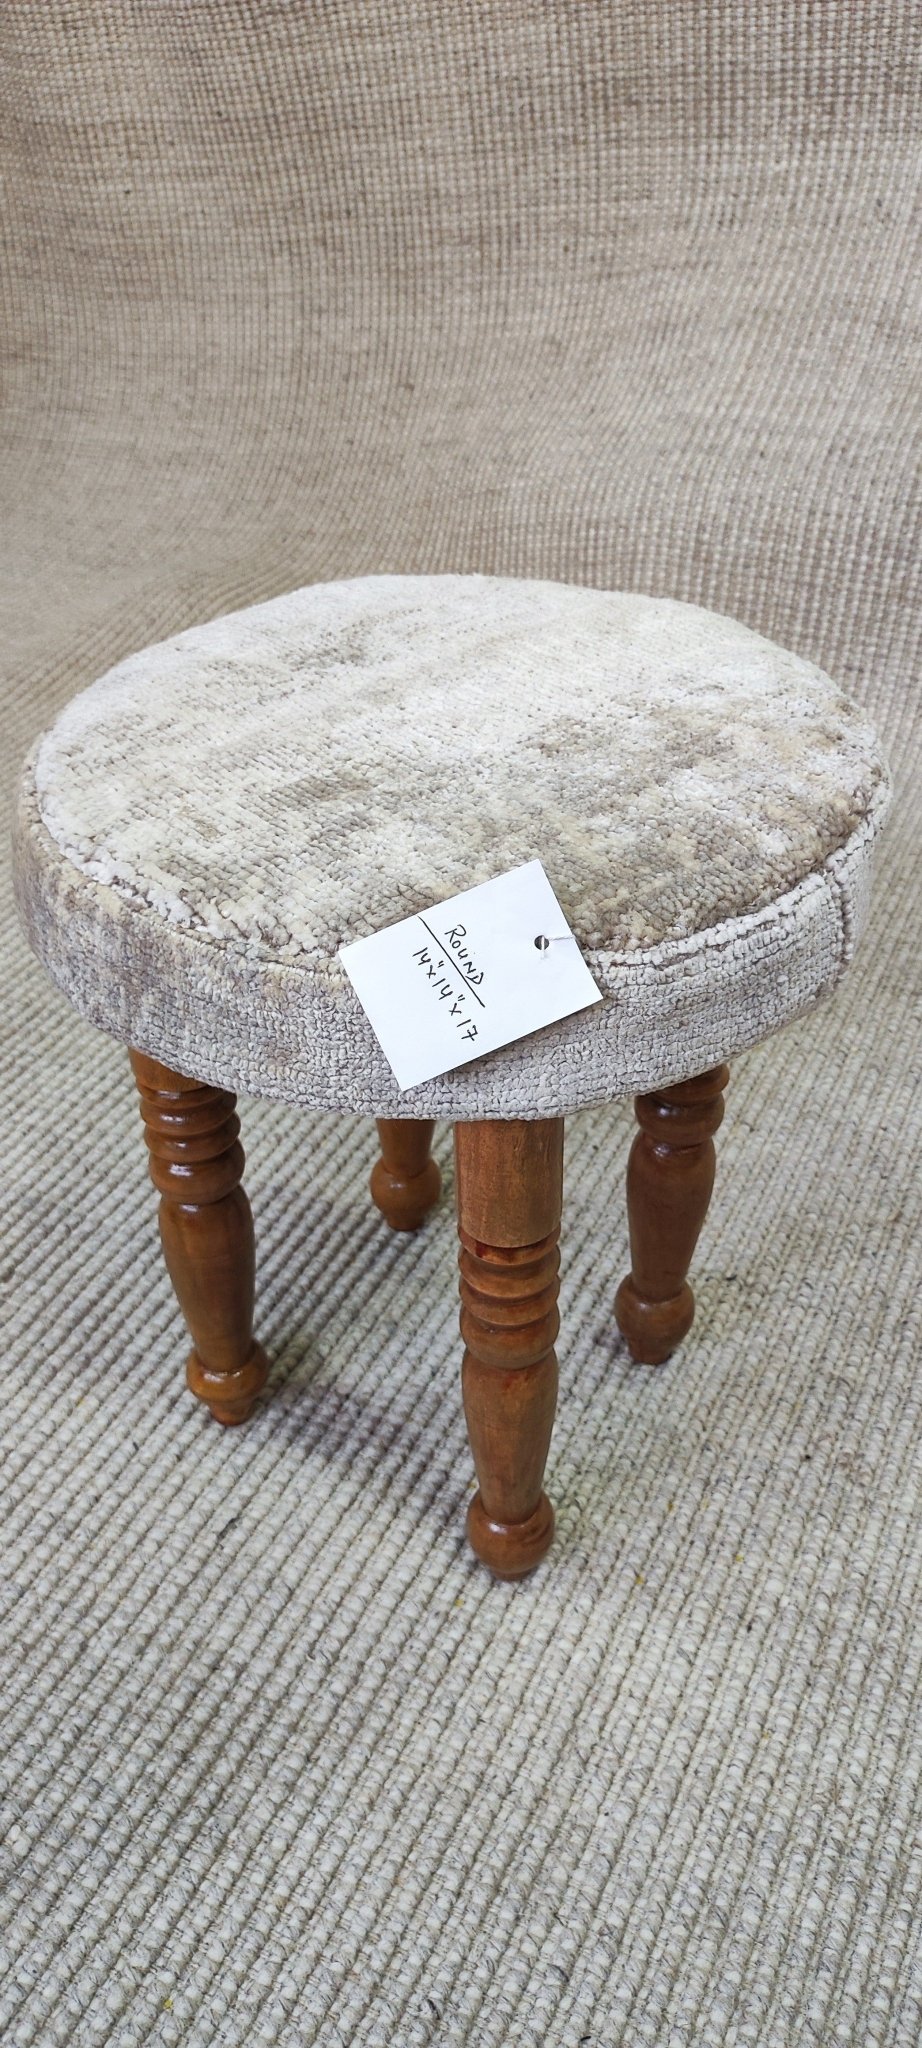 Doris Day 14x14x7 Wooden Upholstered Stool | Banana Manor Rug Factory Outlet